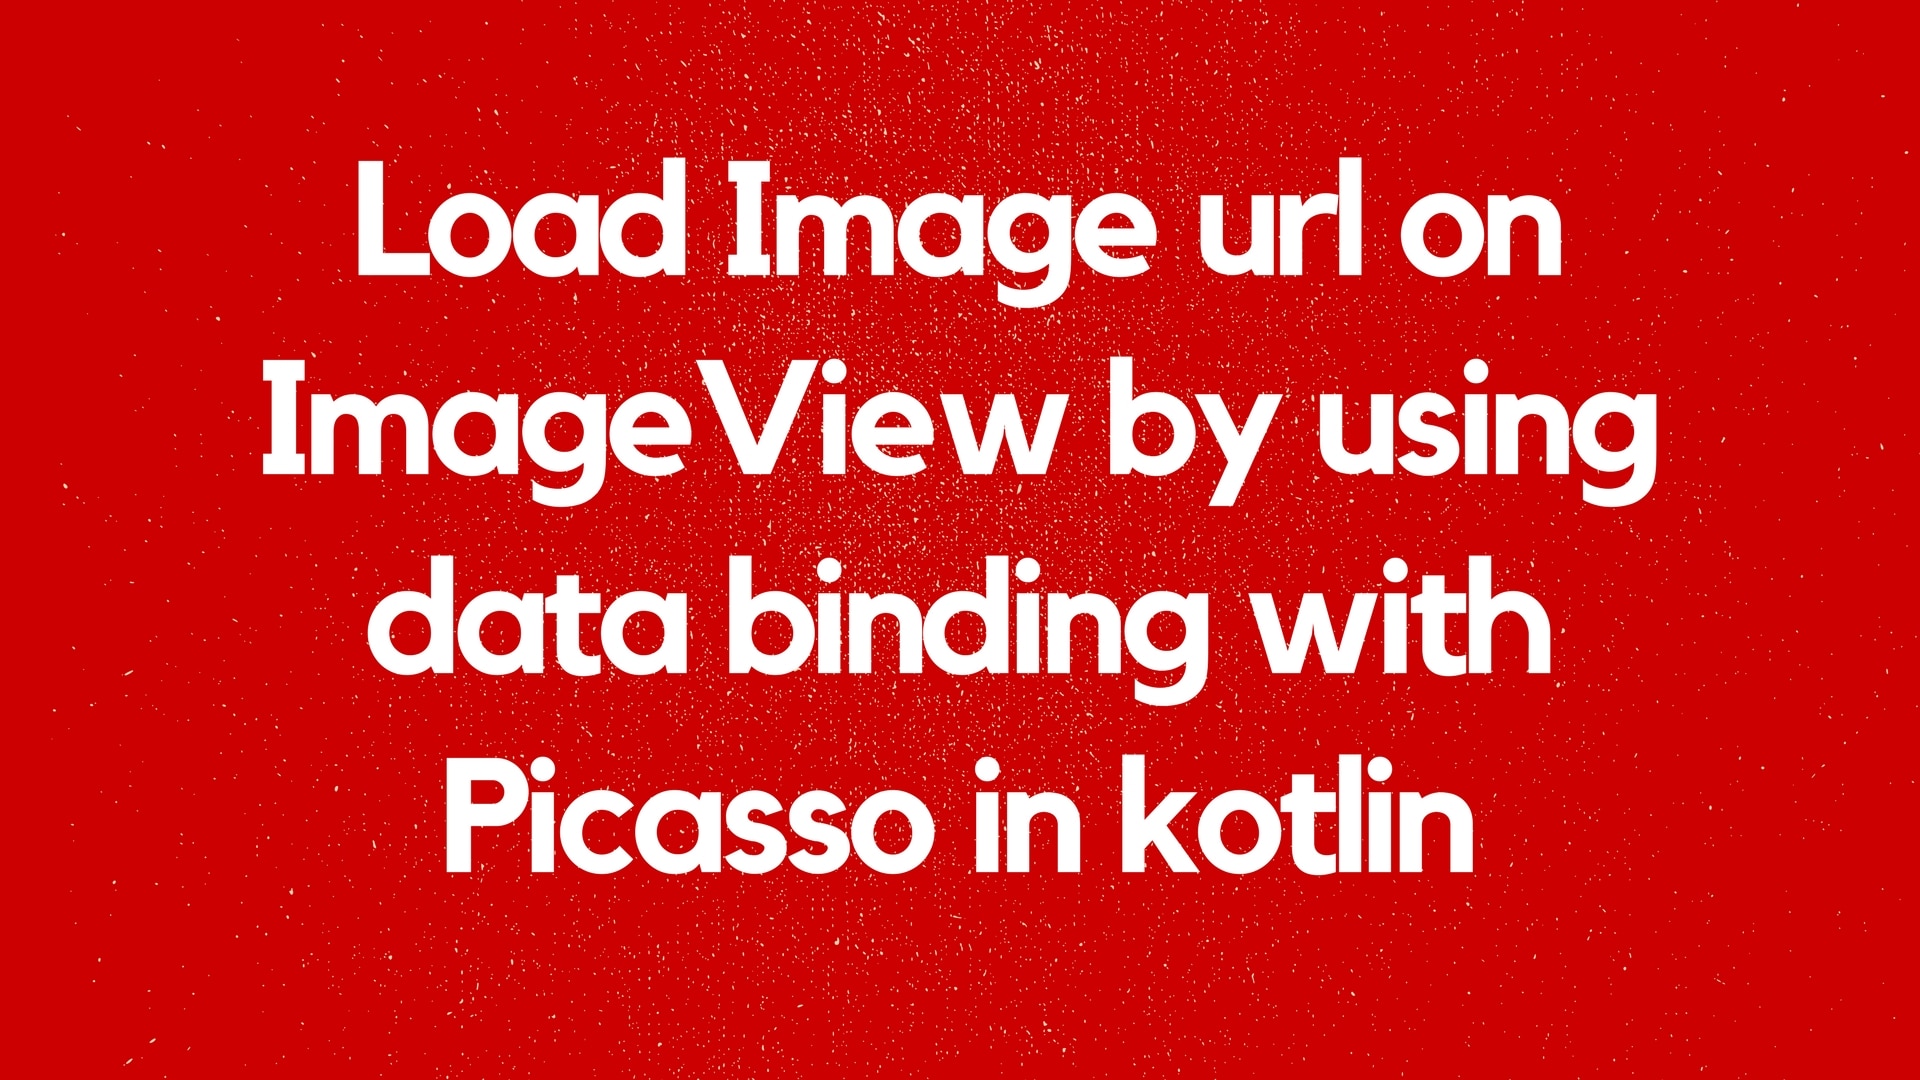 Load Image url on ImageView by using data binding with Picasso in Kotlin